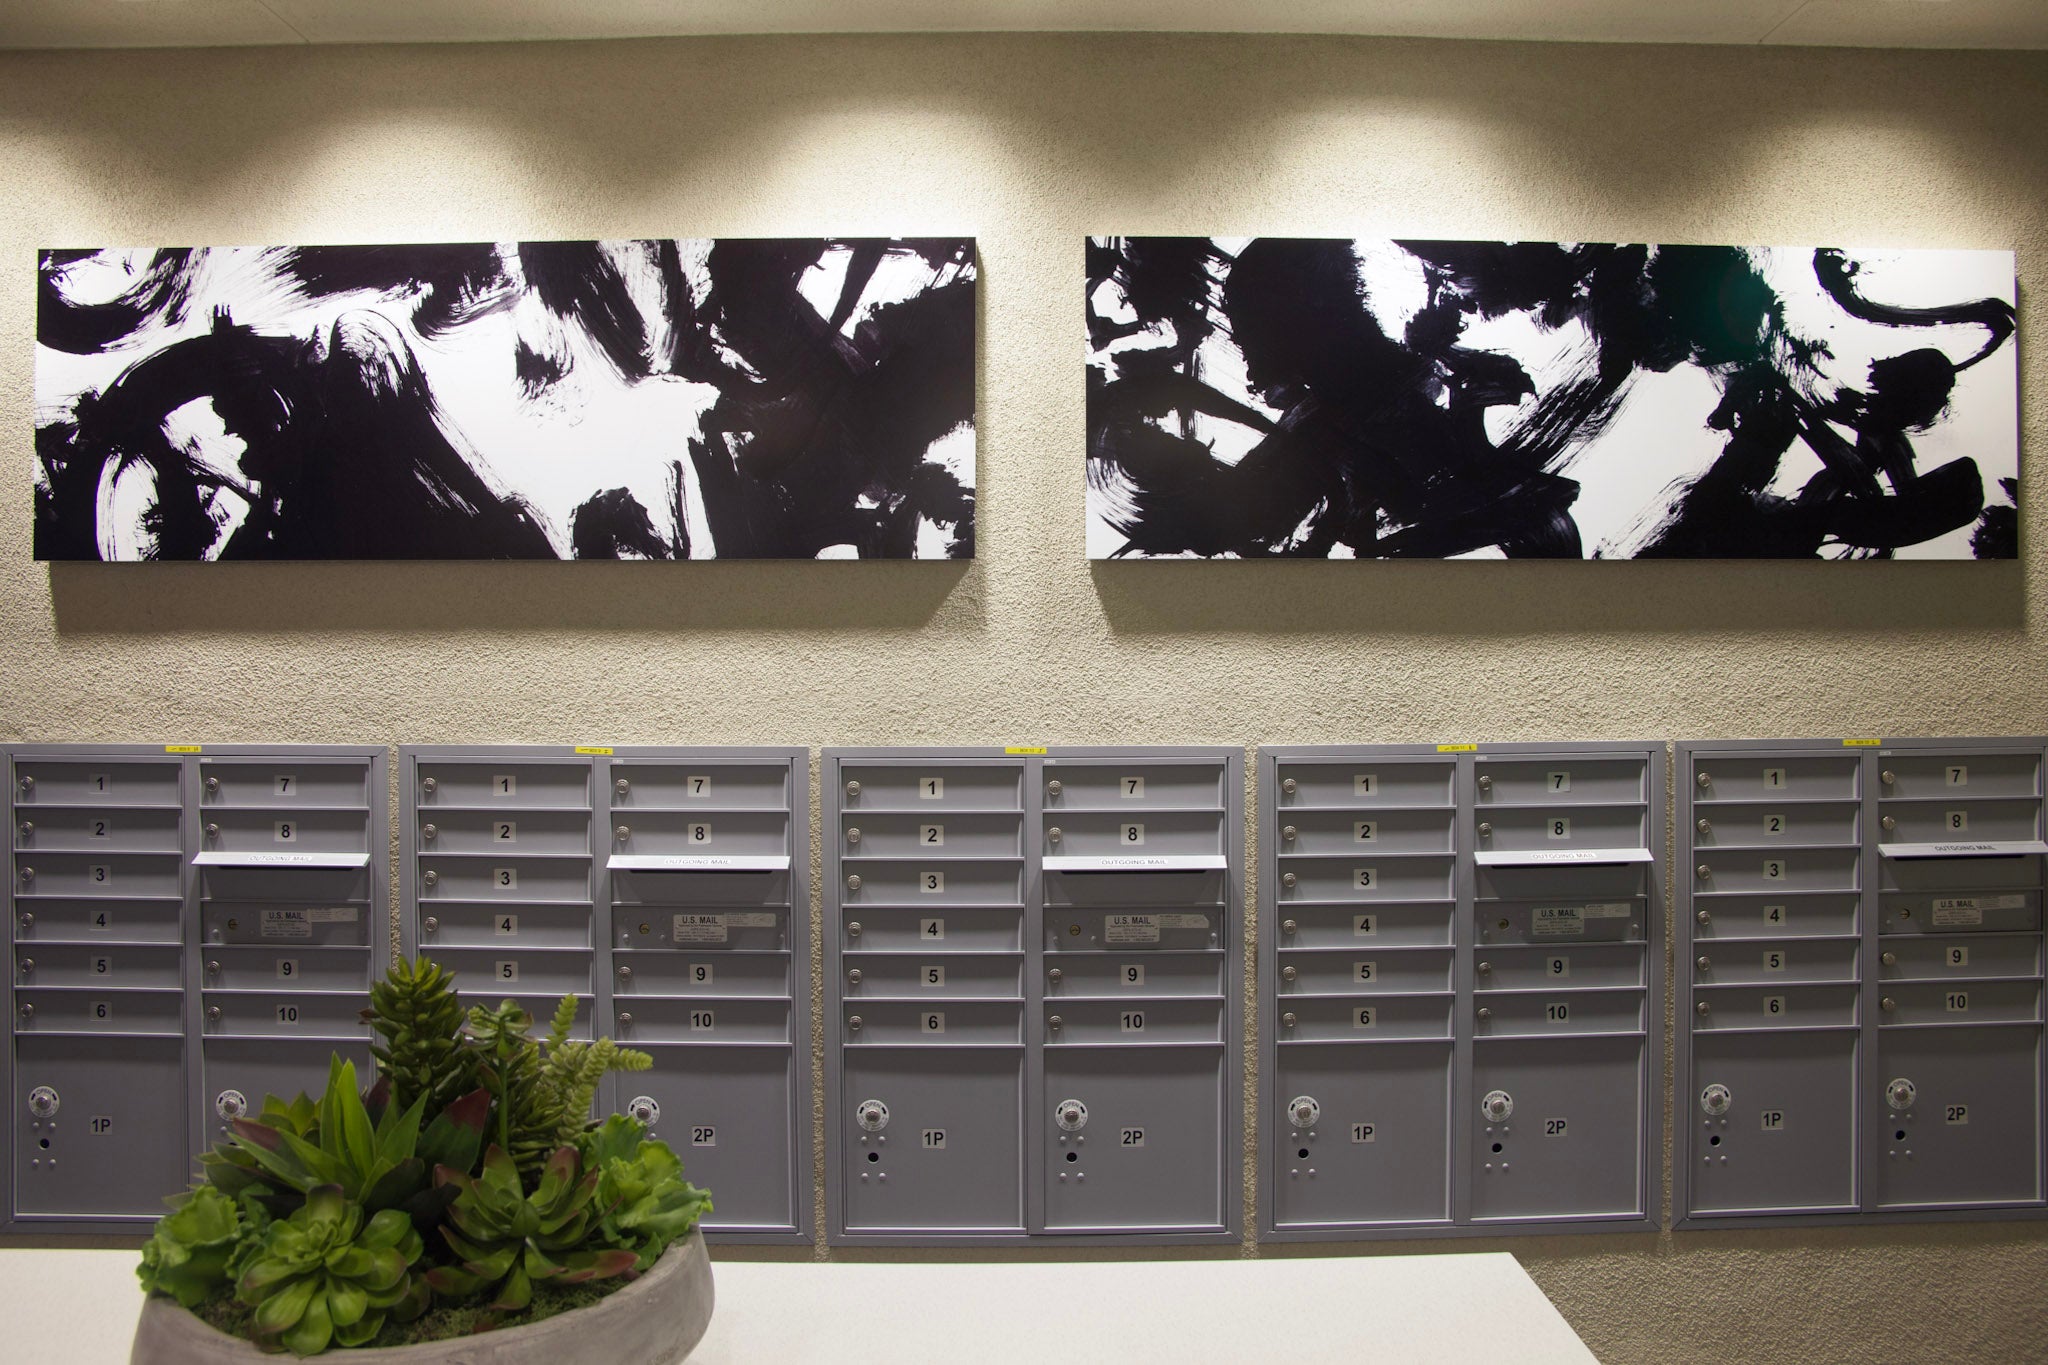 Mailroom at Alexan Aspect adorned with abstract black and green brushstroke art by WRAPPED Studios, injecting color into the sleek space.